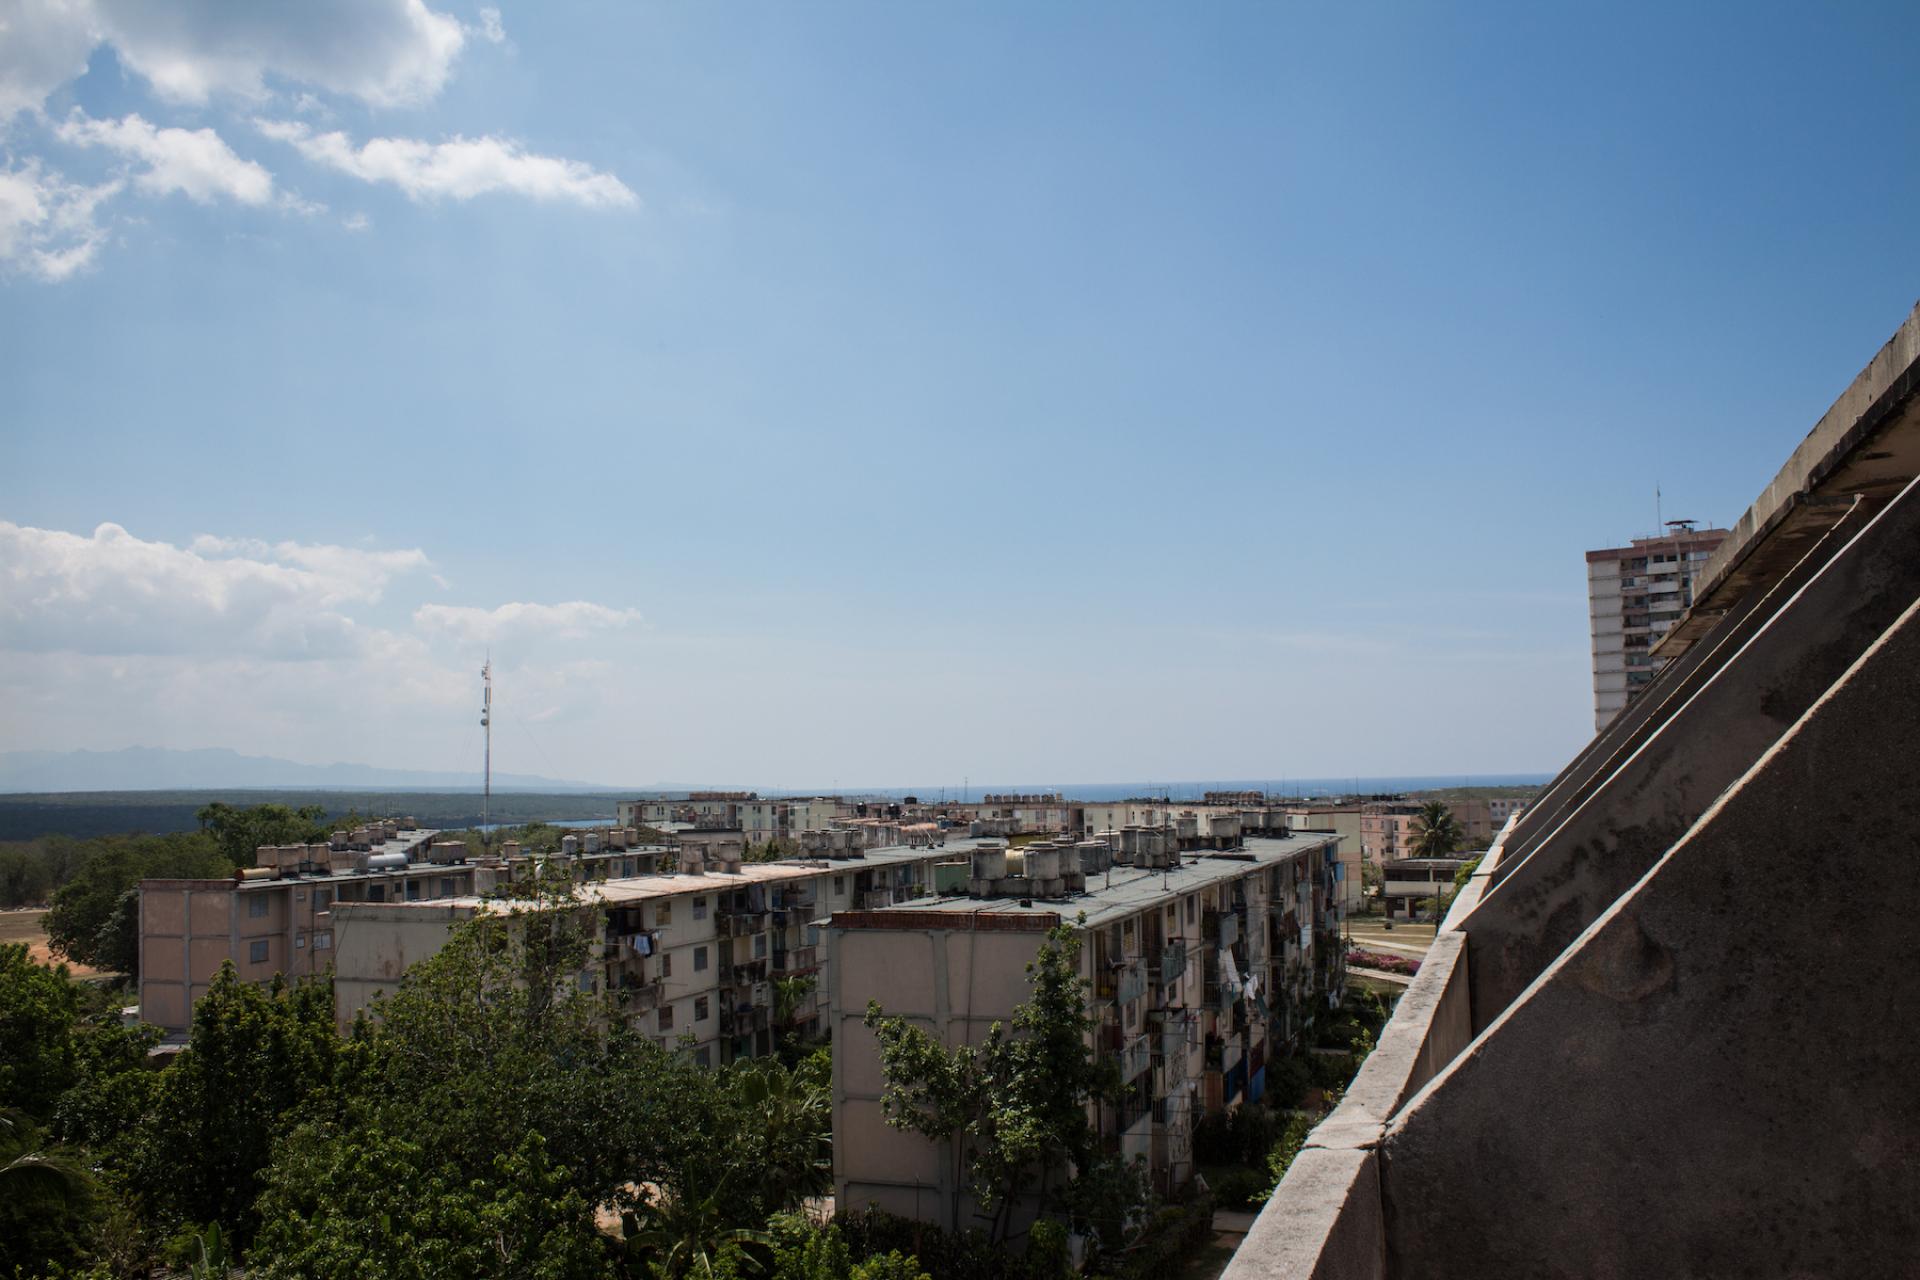 Ciudad Nuclear, Cuba: view from the balcony of a spacious residential complex that never got finished.